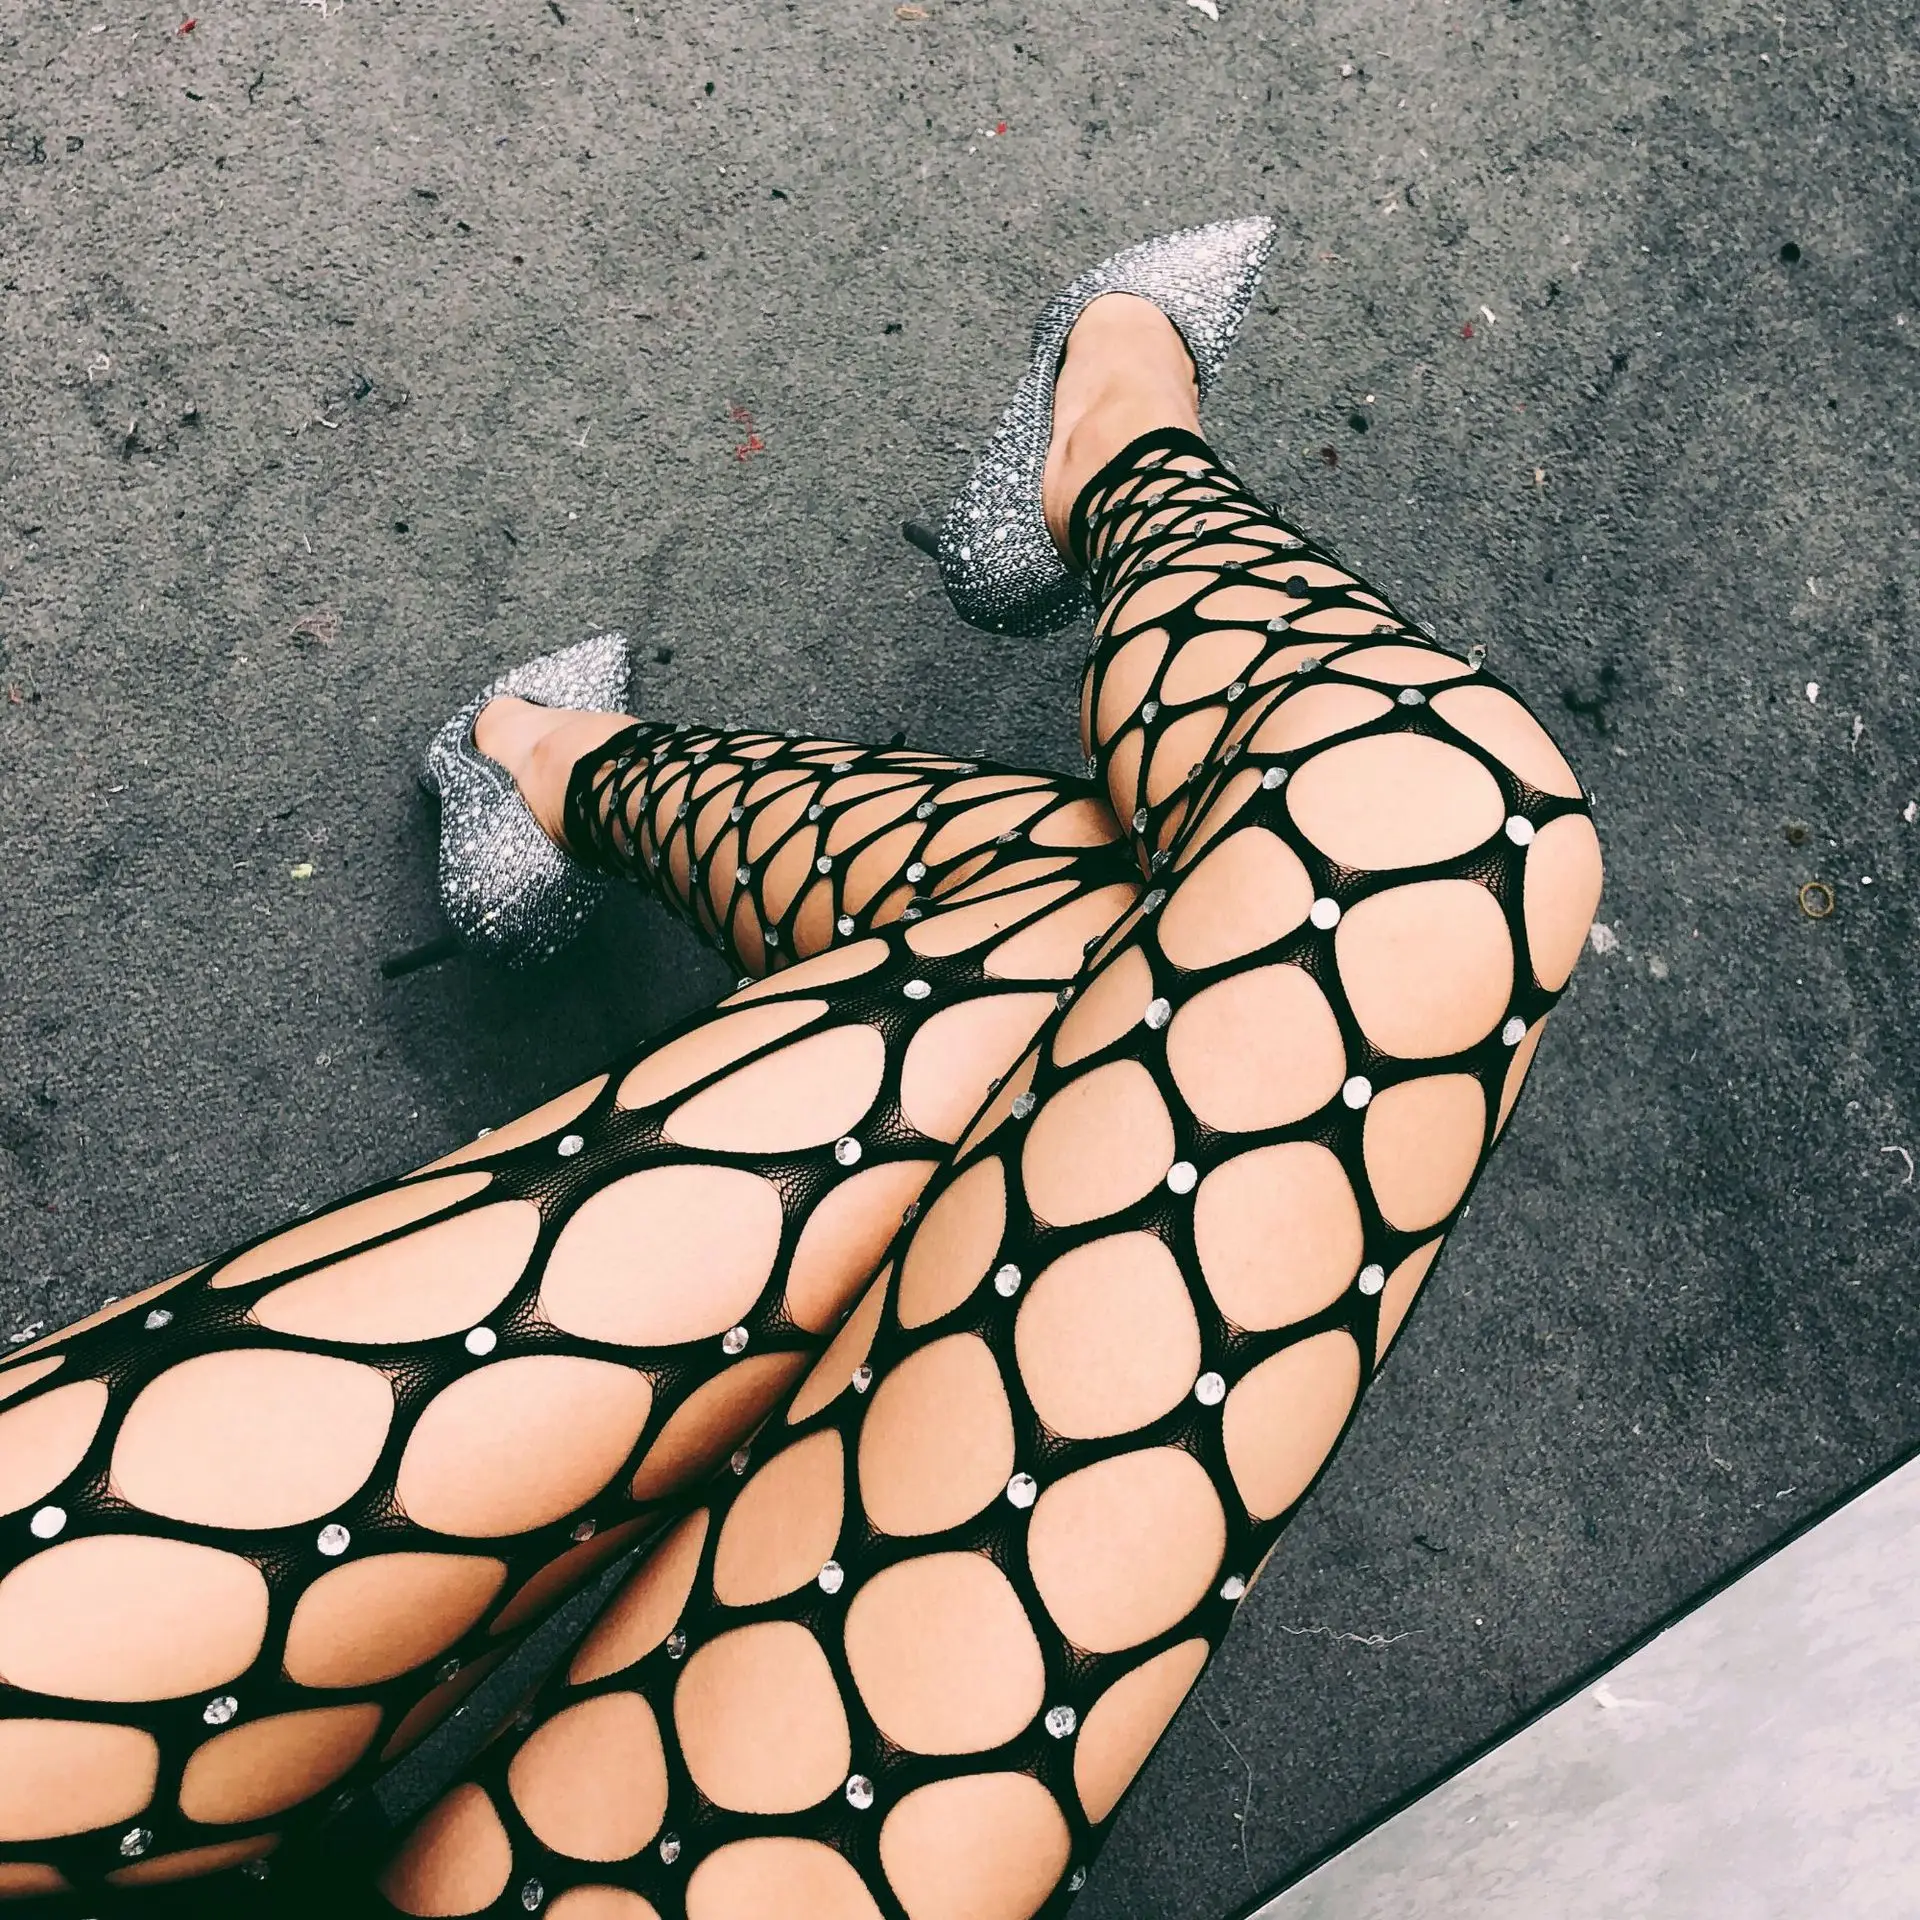 

Women's Sexy Rhinestone Pantyhose Fishnet Stockings Hollow Out Net Tight Hosiery, Different color for you choose